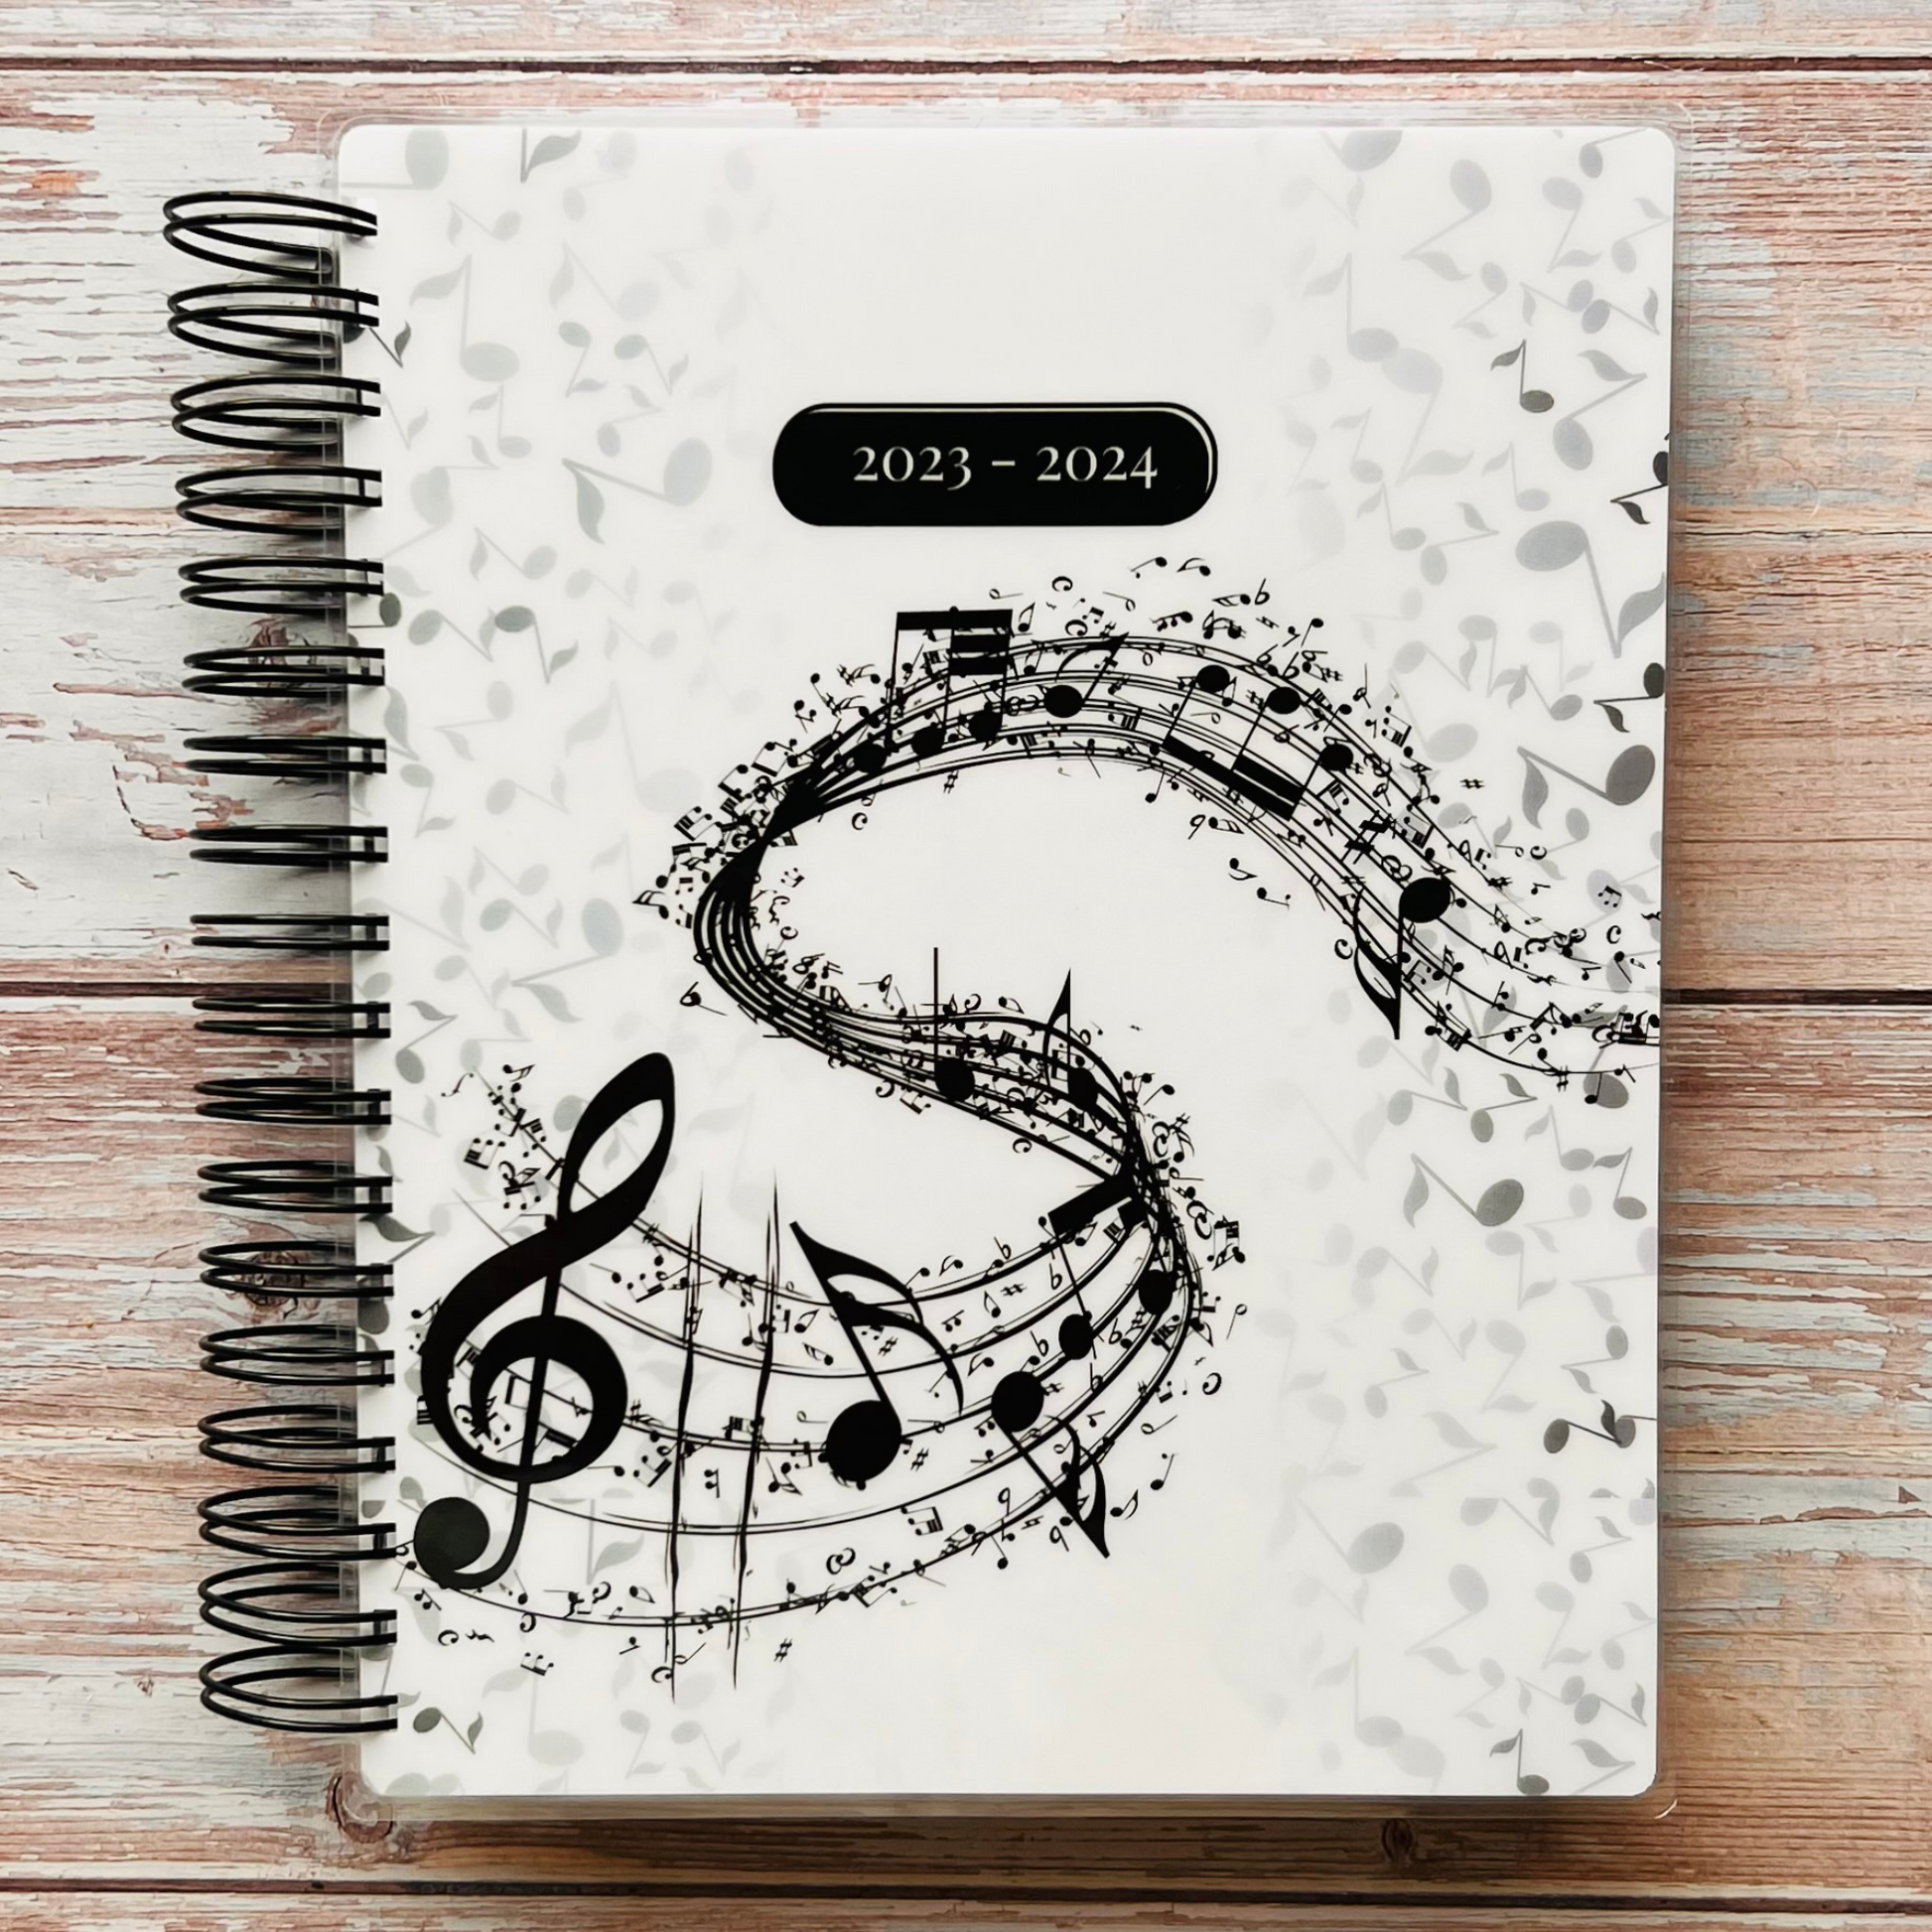 2023-2024 Personalized Monthly Planner - Music Monthly Planners Artful Planner Co. July-2023 20 Meal Planner Pages added to back +$3.00 